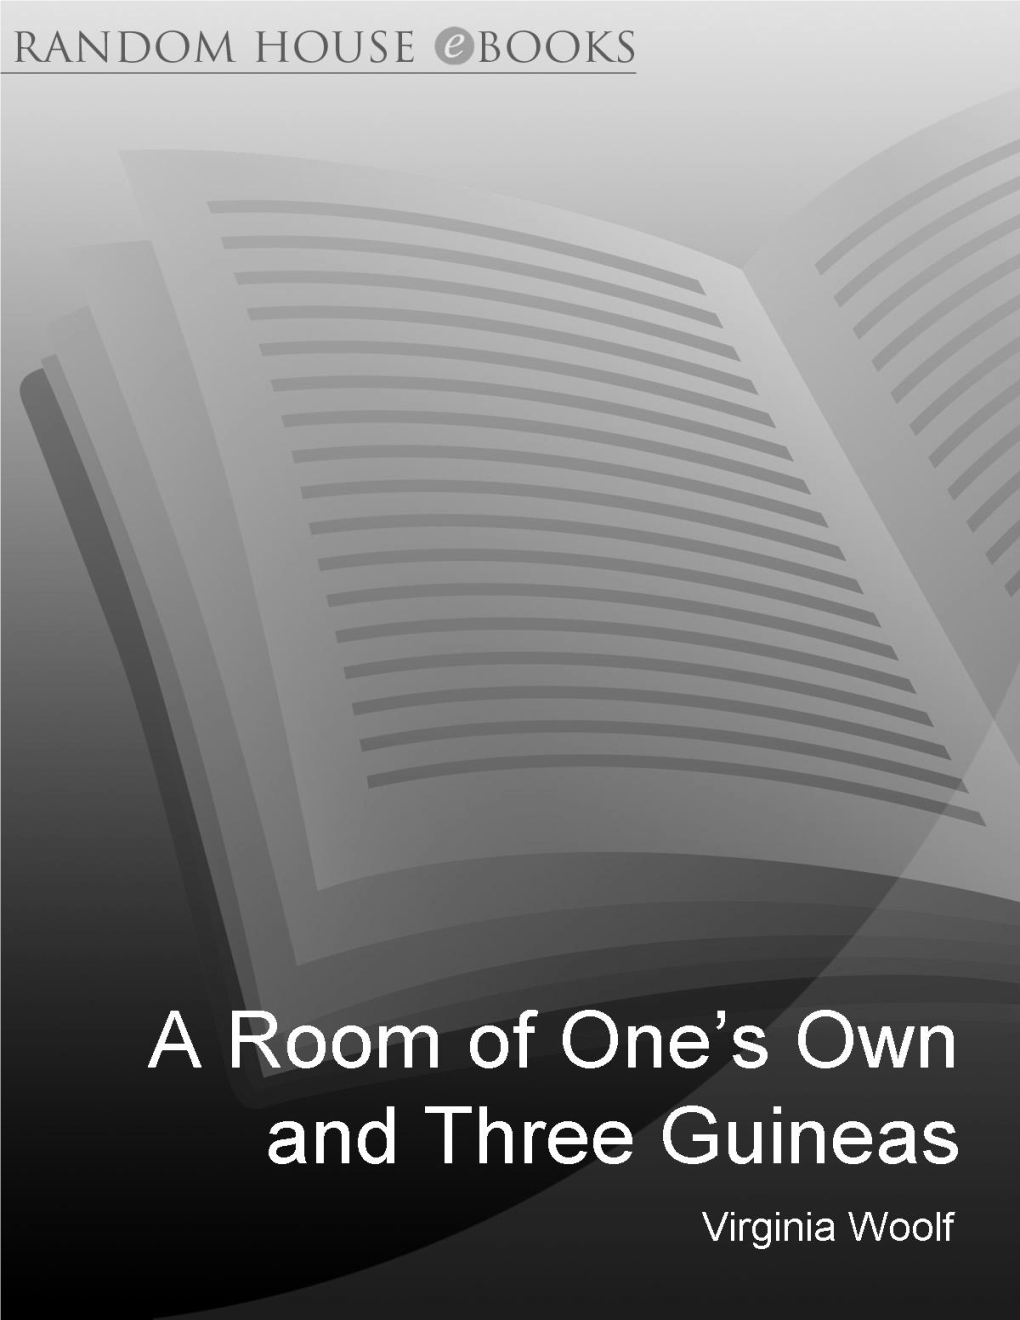 A Room of One's Own and Three Guineas